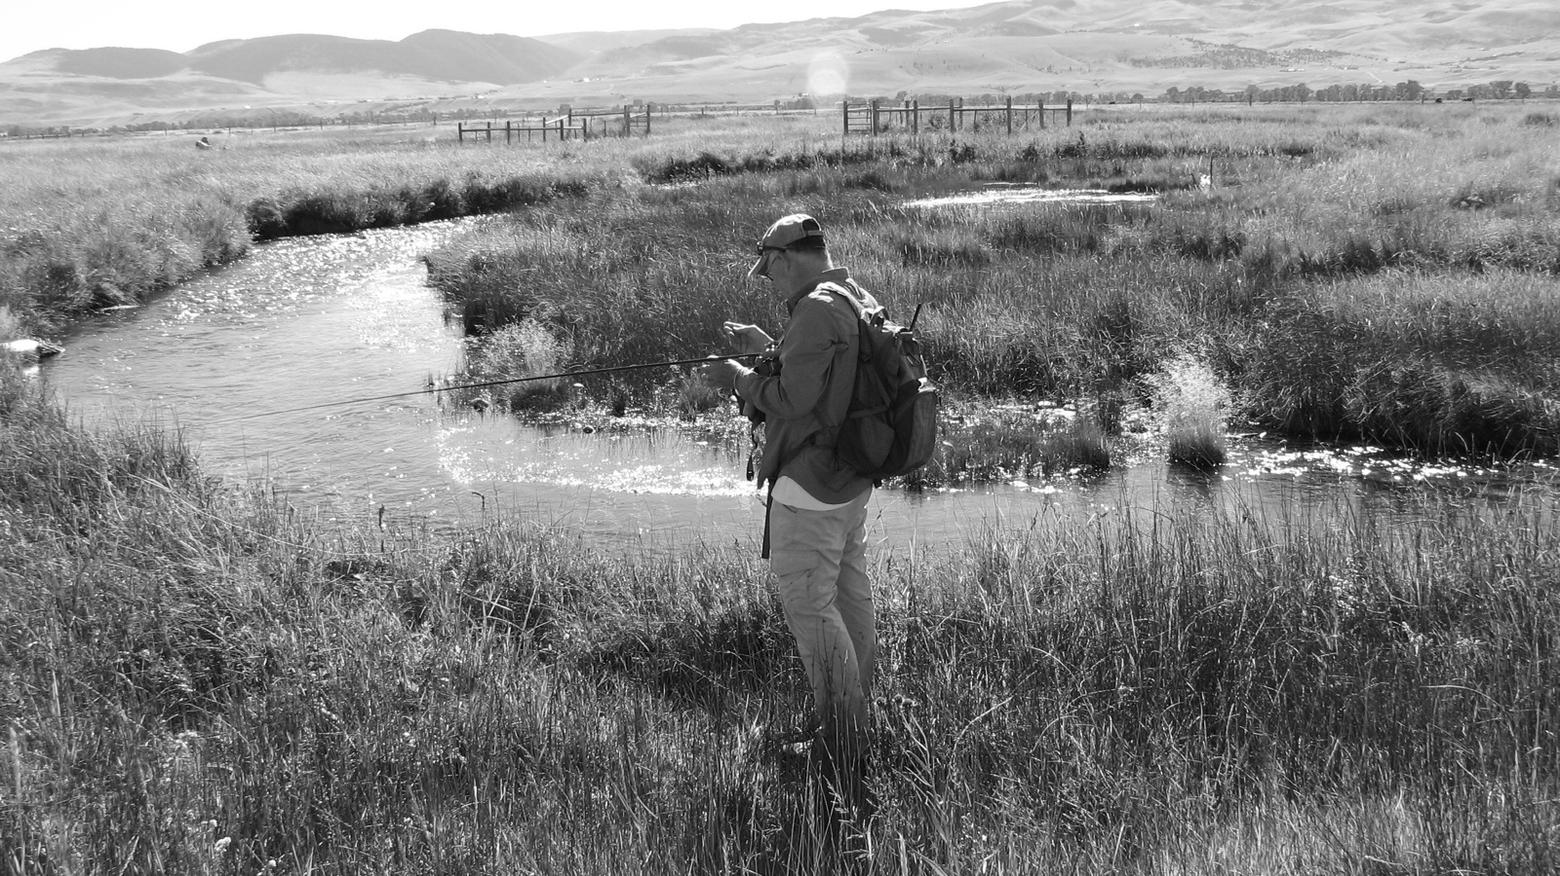 Sadler on Jeff Laszlo's Granger Ranches and the banks of a fully restored O'Dell Creek in the Madison Valley. Photo by Alex Diekmann